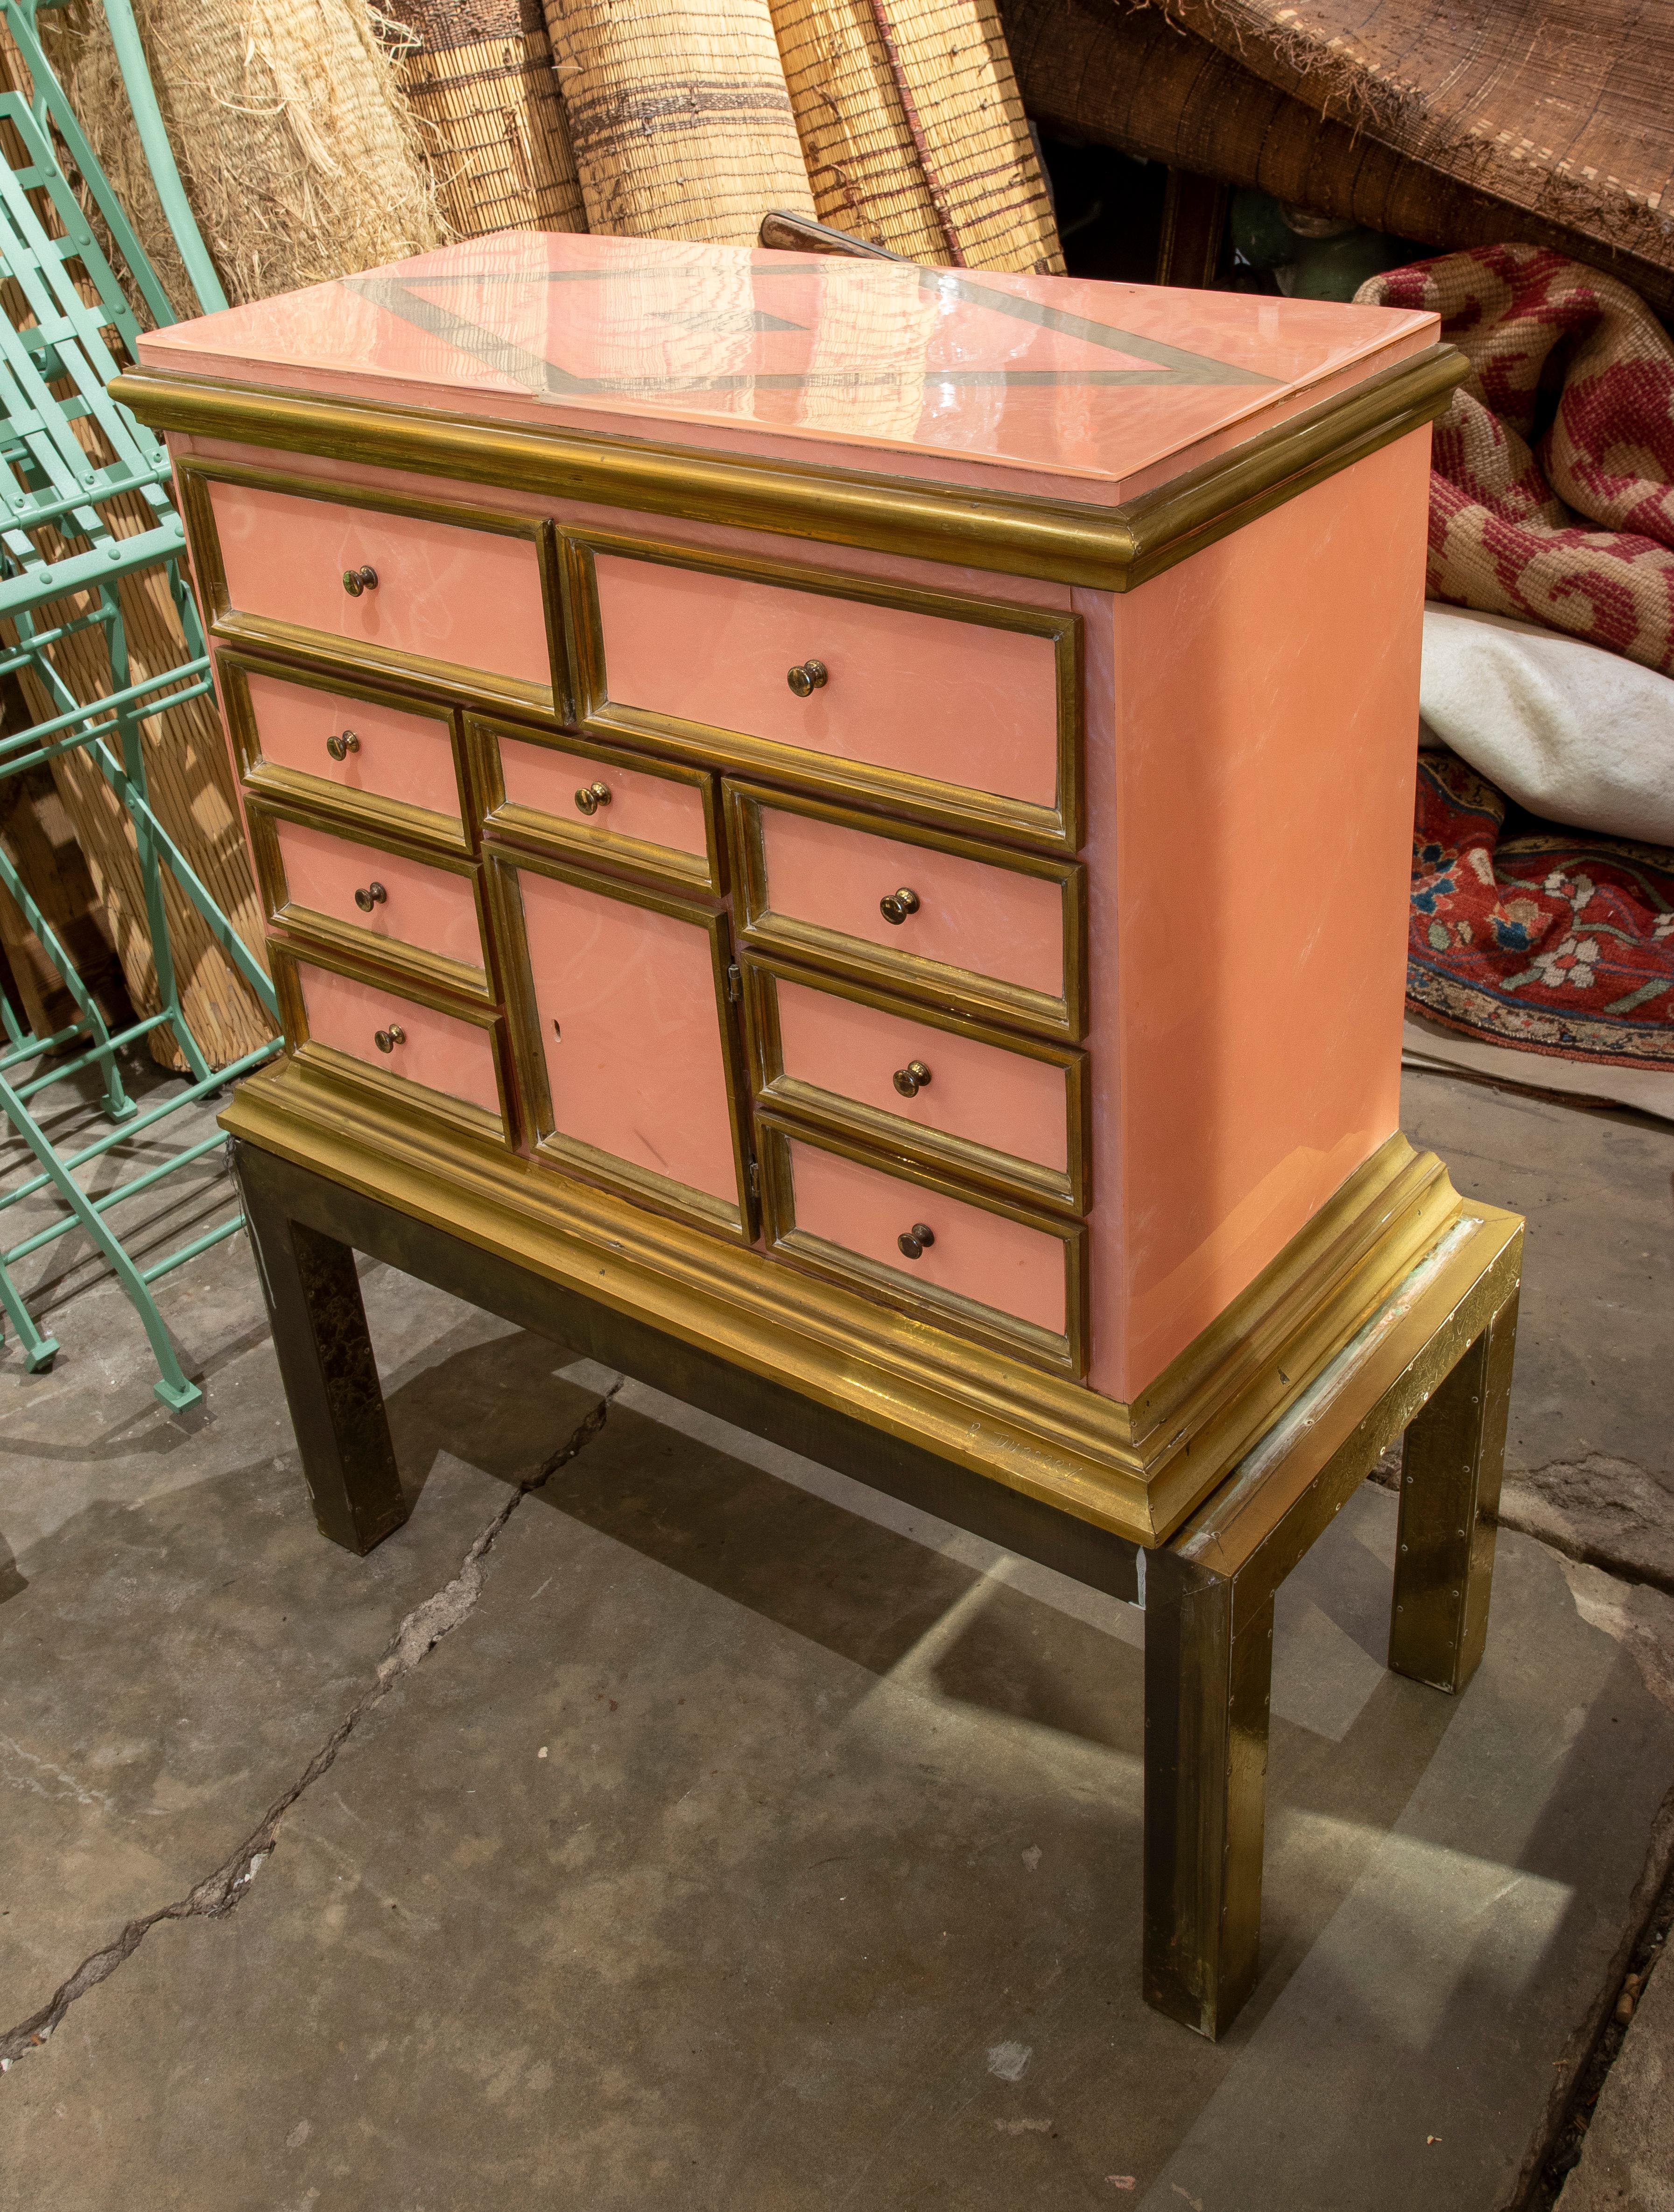 20th Century Wooden Chest Bargueño with Foot of the Artist R. Dubarry with Hand-Carved Brass